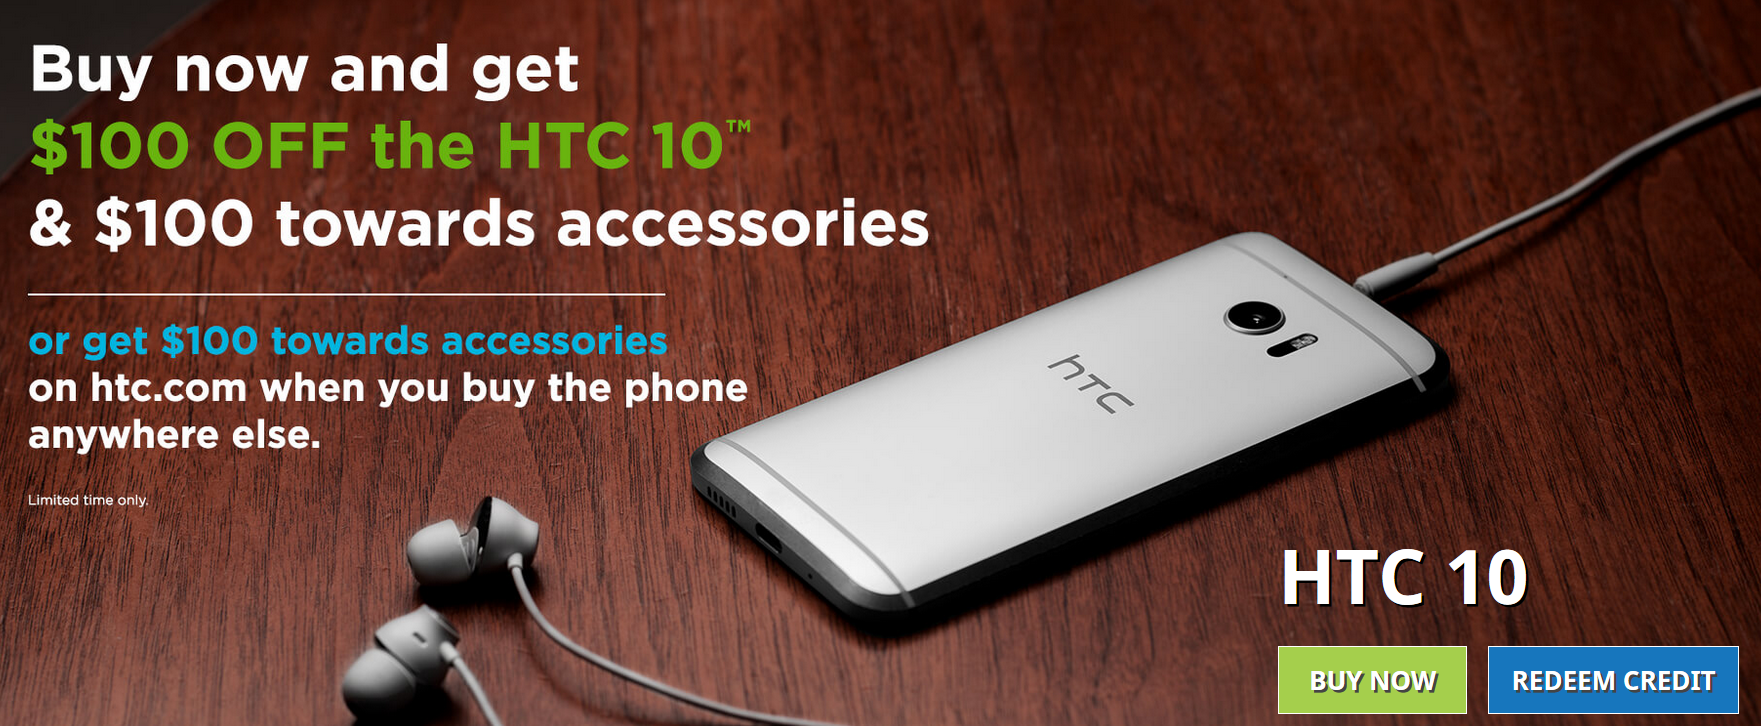 From now through August 7th, you can save $100 on the HTC 10 - Take $100 off the HTC 10 from HTC's online store